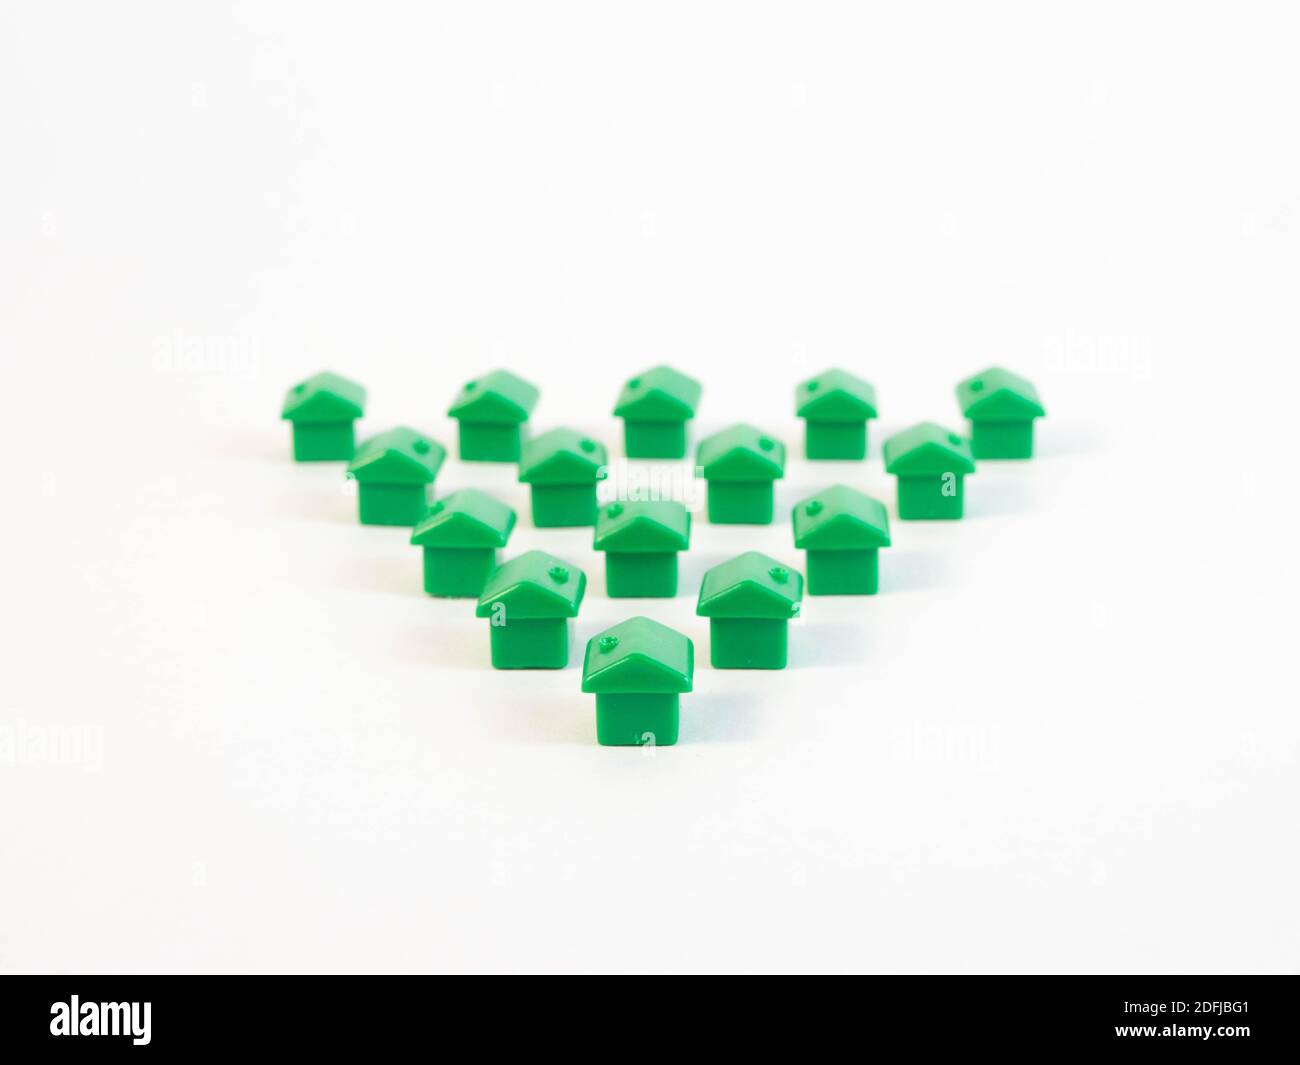 Green colored pawns in the shape of a house with gold coins. Concept around housing and real estate agents. Stock Photo